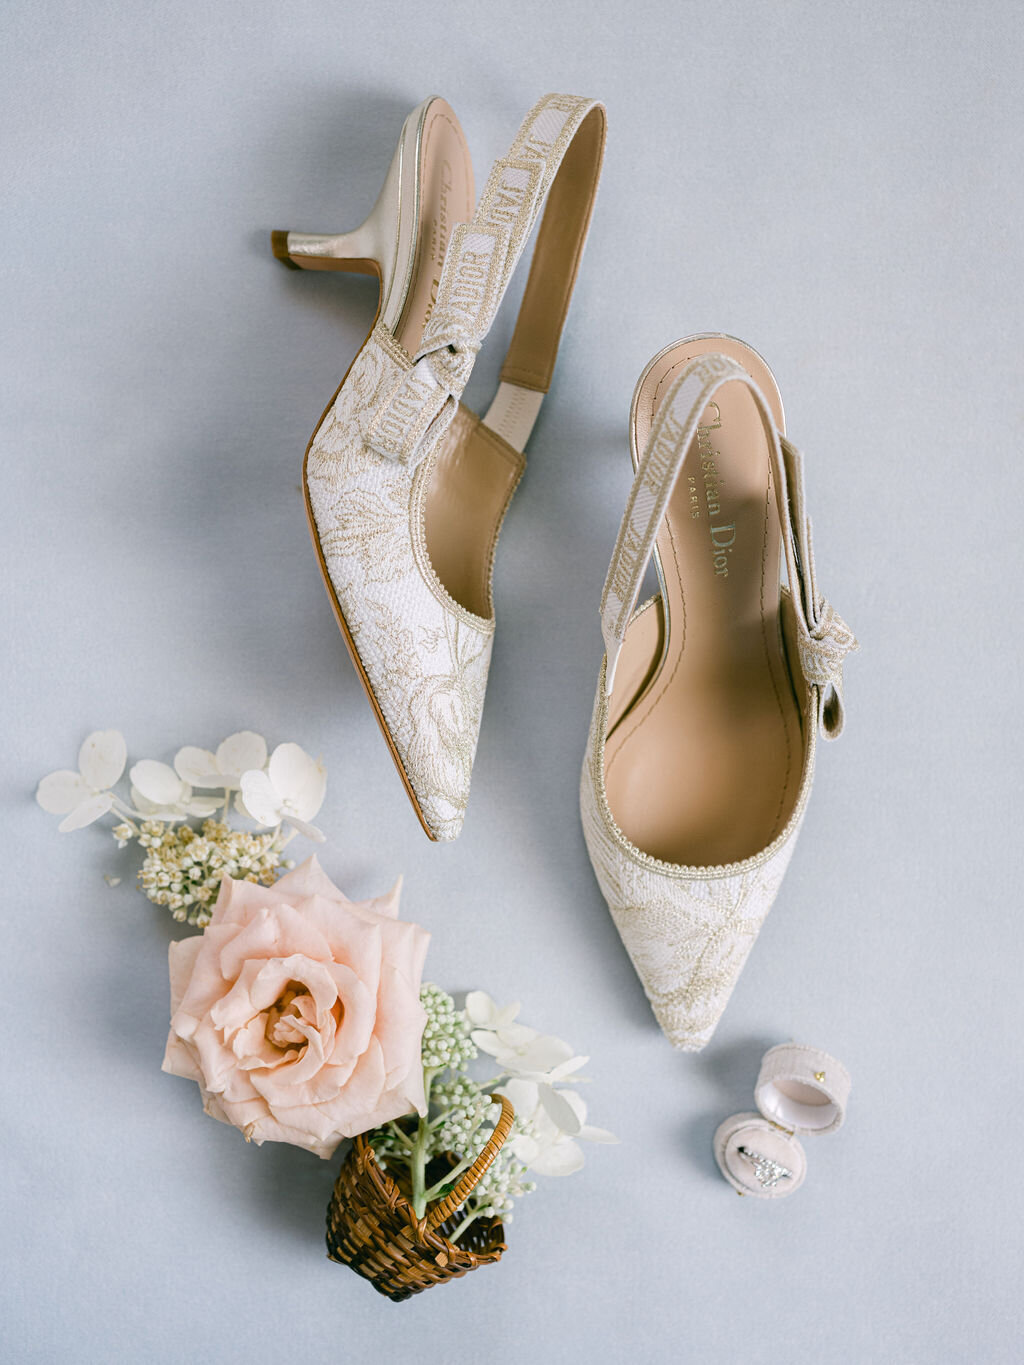 Flatlay of bride’s shoes and ring with peach rose and white hydrangea.